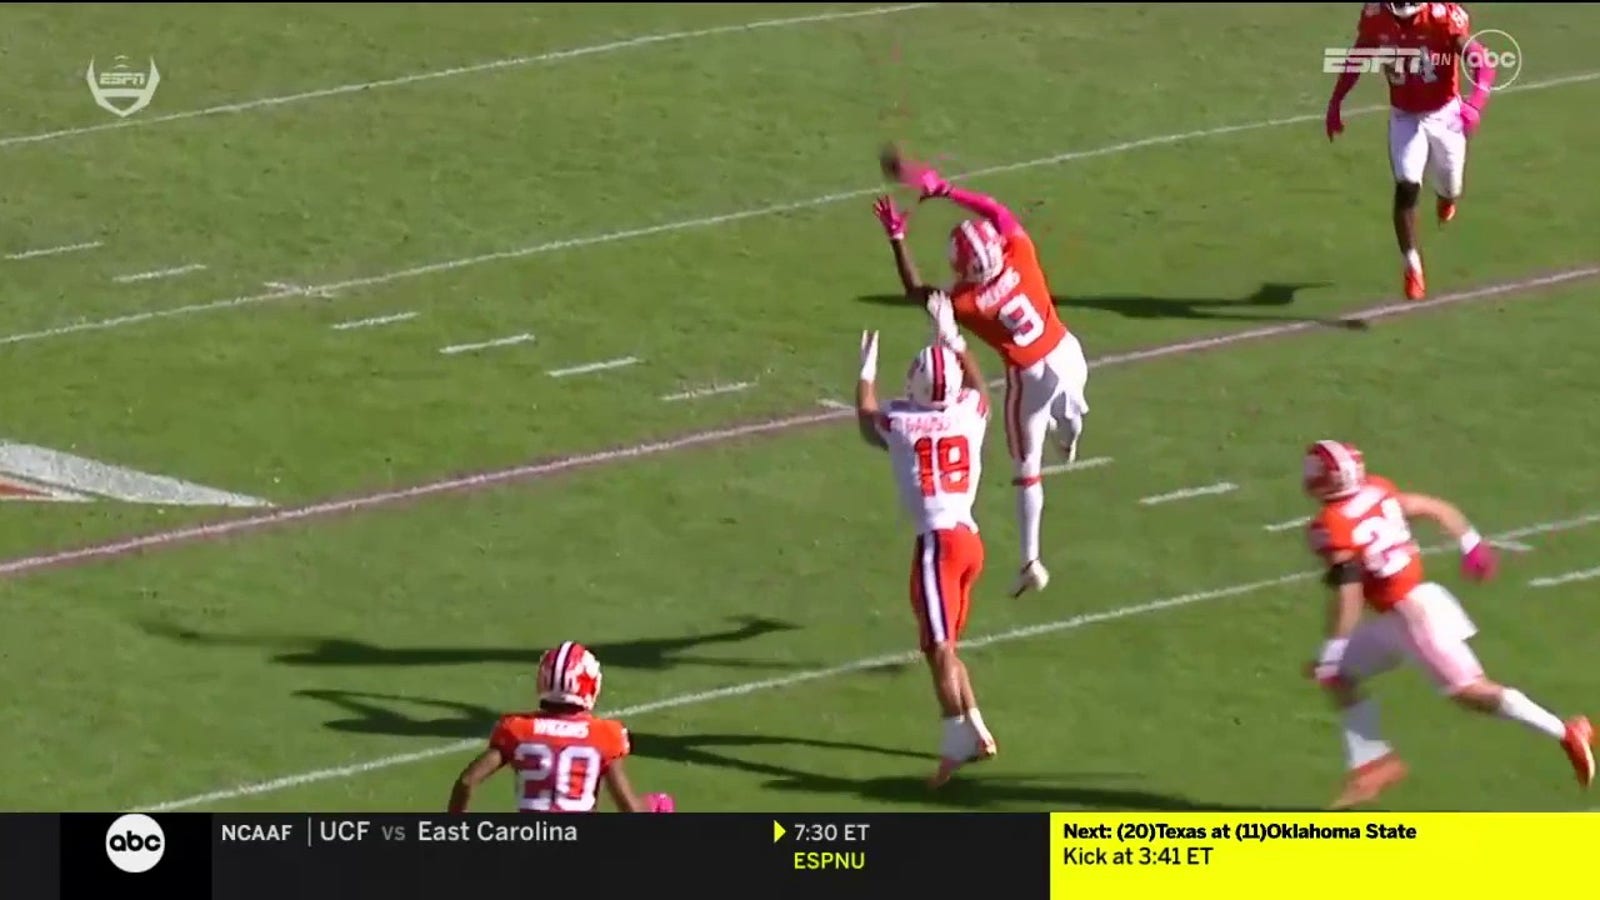 Clemson's defense comes up clutch with a game-sealing interception